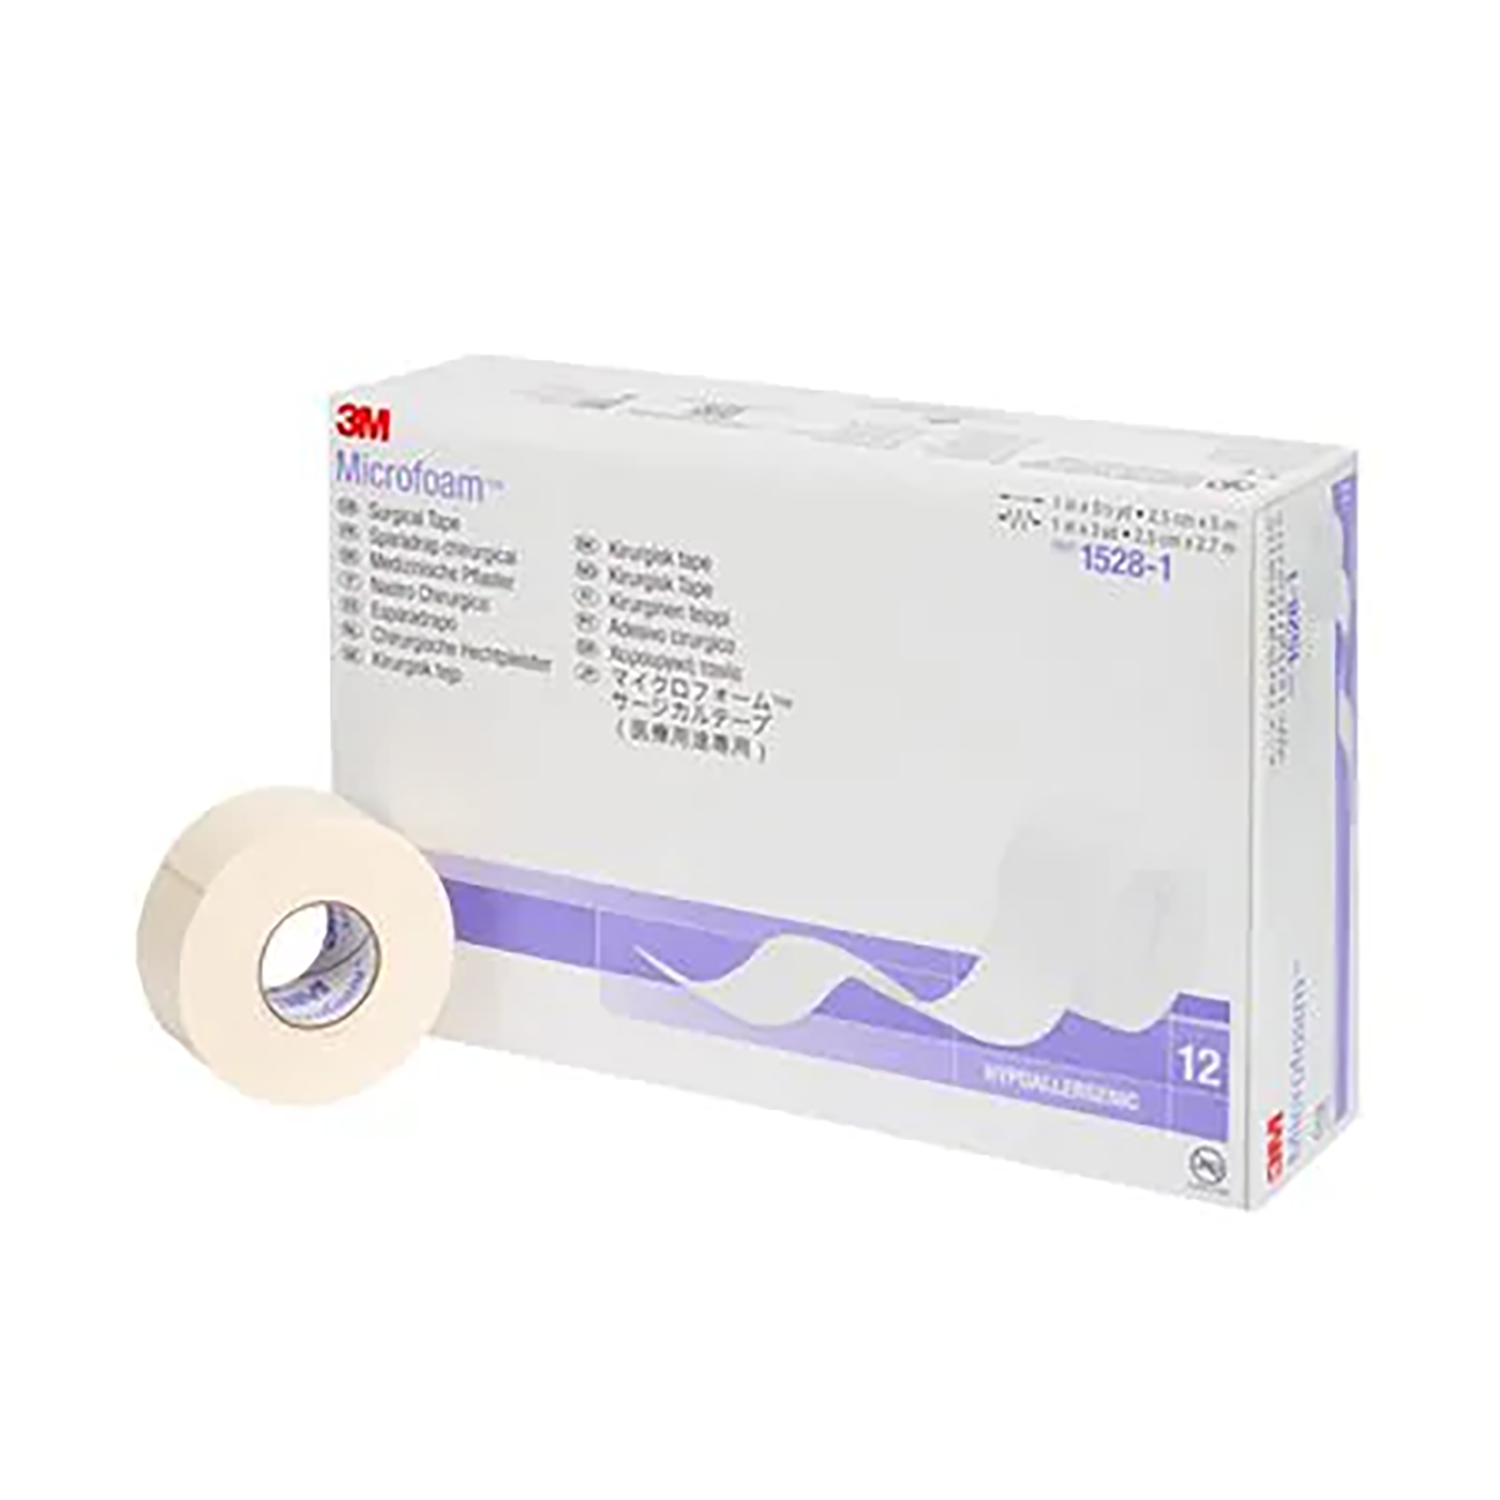 3M Microfoam Surgical Tape | 2.5cm x 5m | Pack of 12 | Short Expiry Date